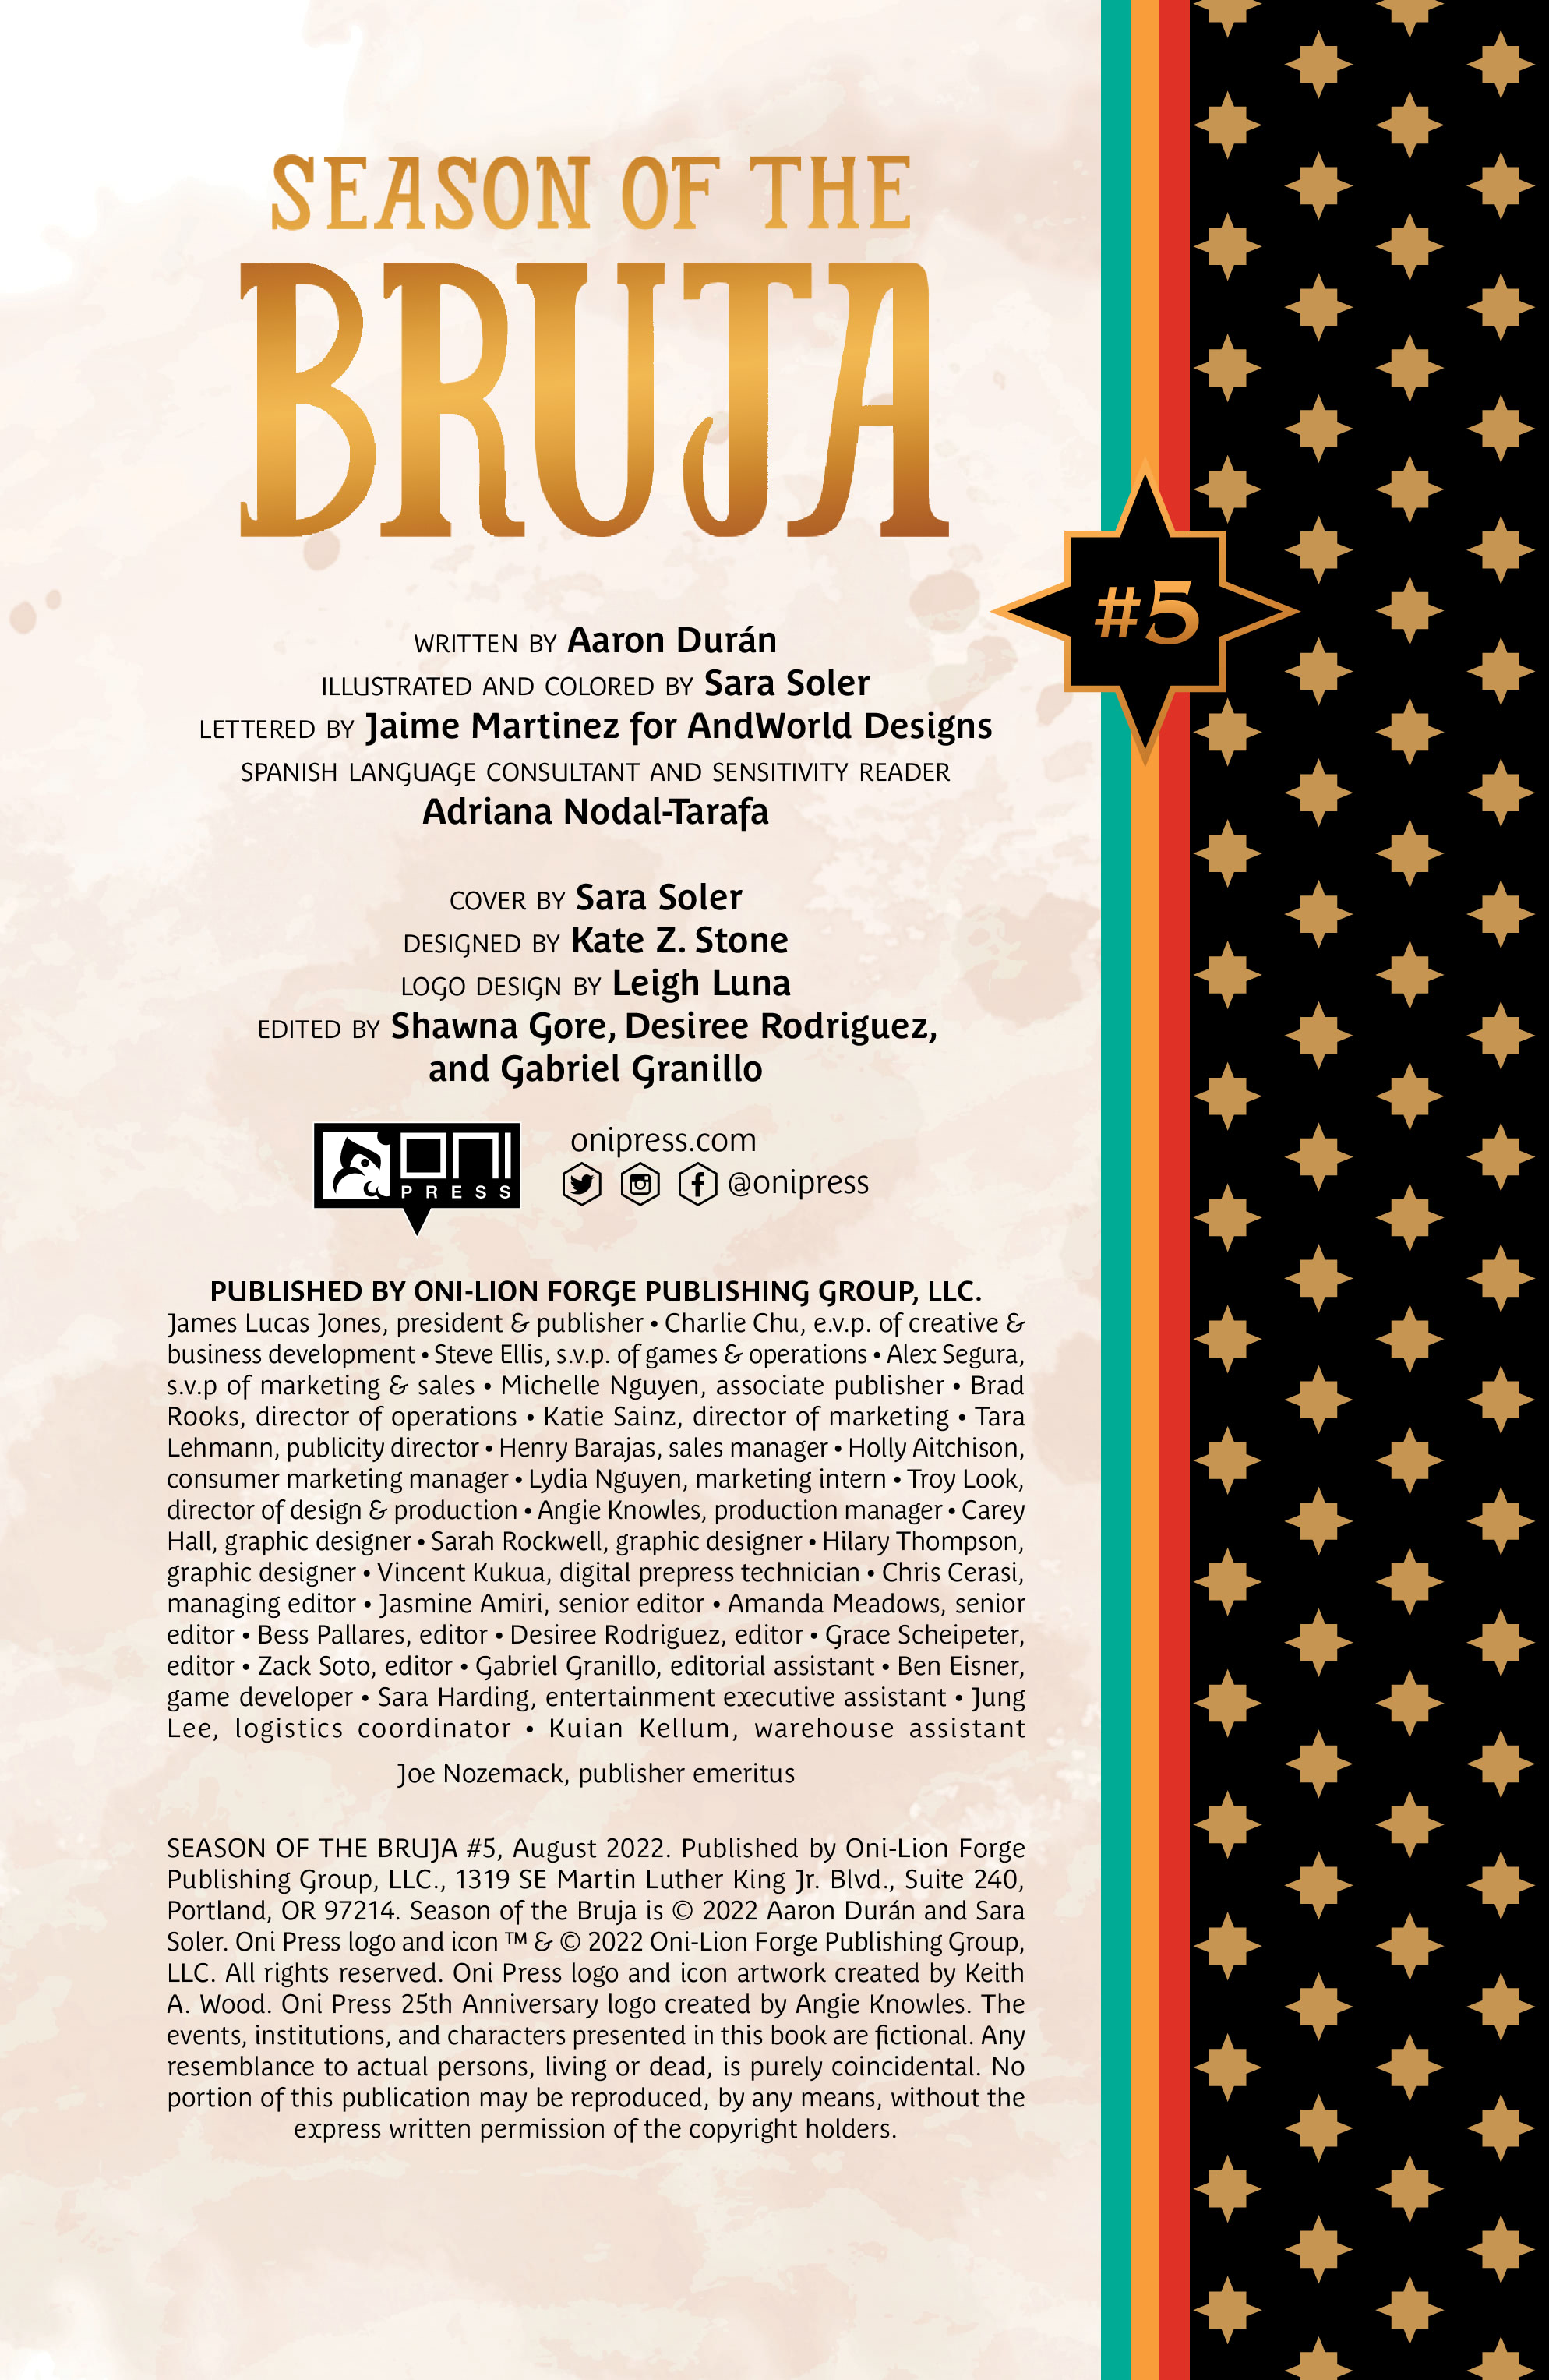 Read online Season of the Bruja comic -  Issue #5 - 2